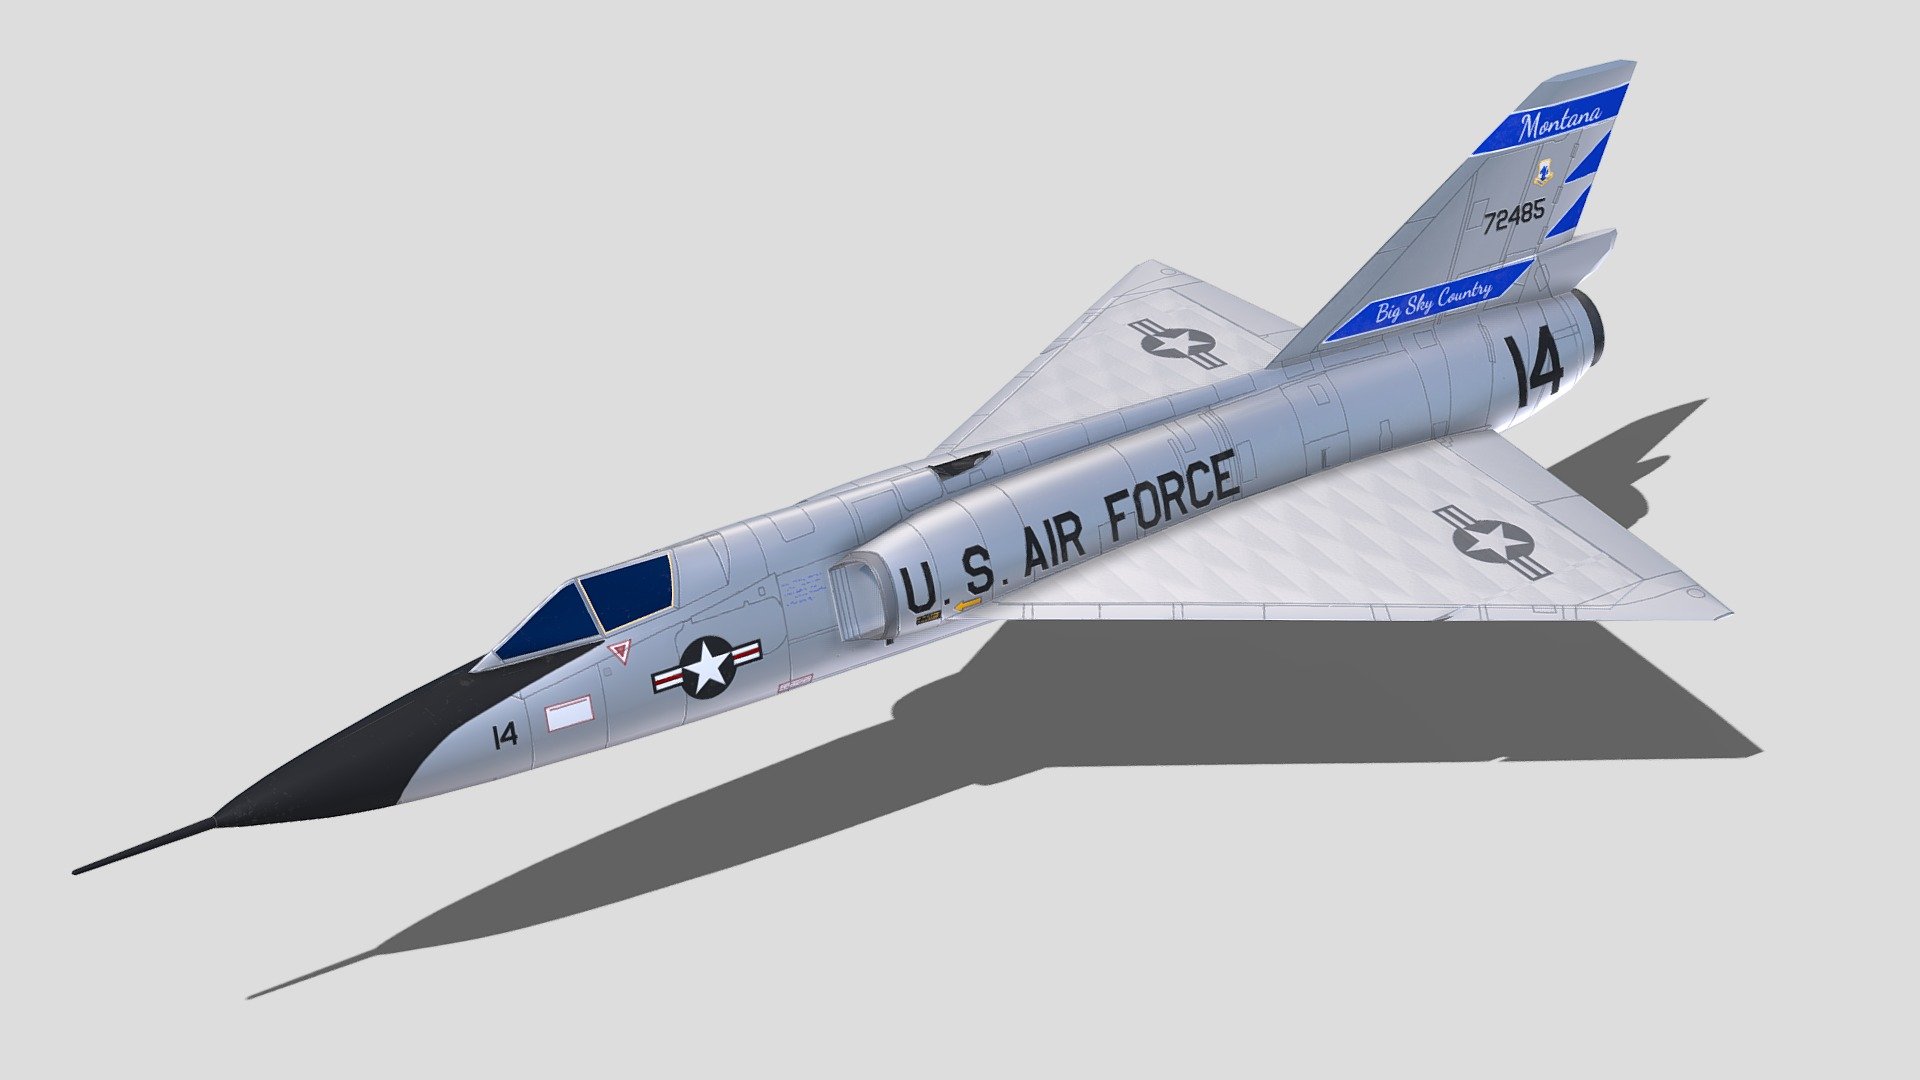 The Convair F-106A Delta Dart was the last purpose-built all weather interceptor aircraft to serve with the United States Air Force, and still holds the record for the fastest single engine jet aircraft, reaching a speed of Mach 2.3.
For it's time, a very futuristic aircraft, it features many systems including internal weapons bays, IRST, Datalink, and was one of the most maneuverable aircraft of the era due to a sophisticated fuel transfer system allowing for optimal center of gravity.
This is a model I originally intended to make into a playable VTOL VR aircraft, but have currently stopped work on due to personal reasons. While the texture is one of my more detailed, it is also mirrored, which I don't like. Definitely the last time I'm making that mistake 3d model